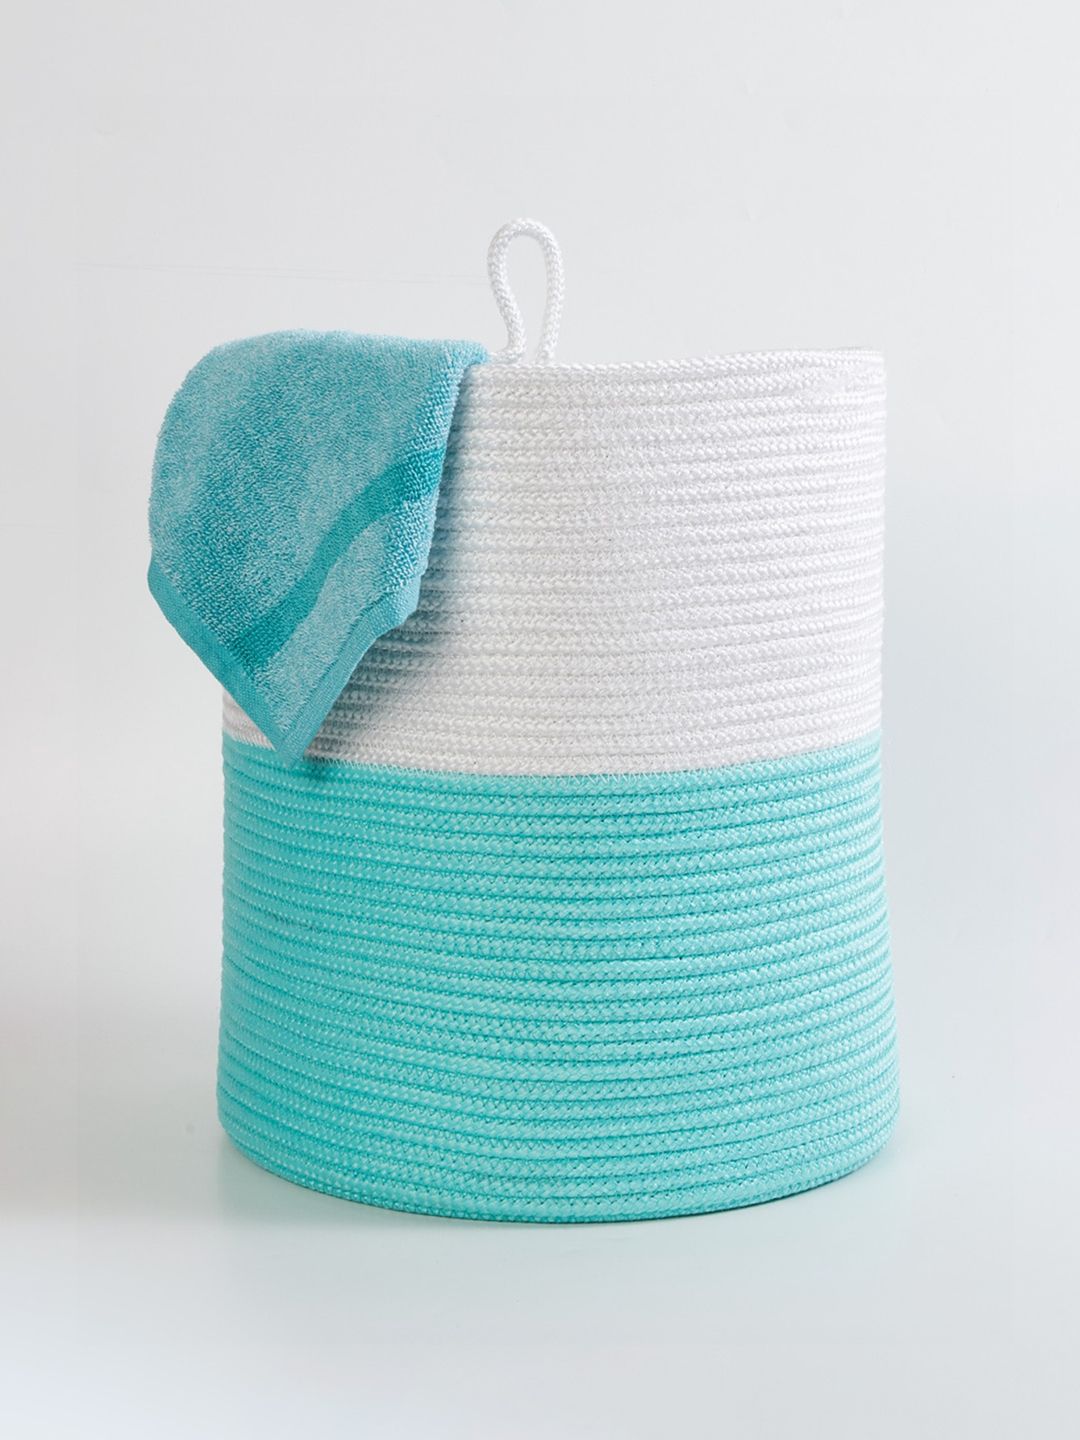 Home Centre Teal Blue Braided Laundry Basket Price in India